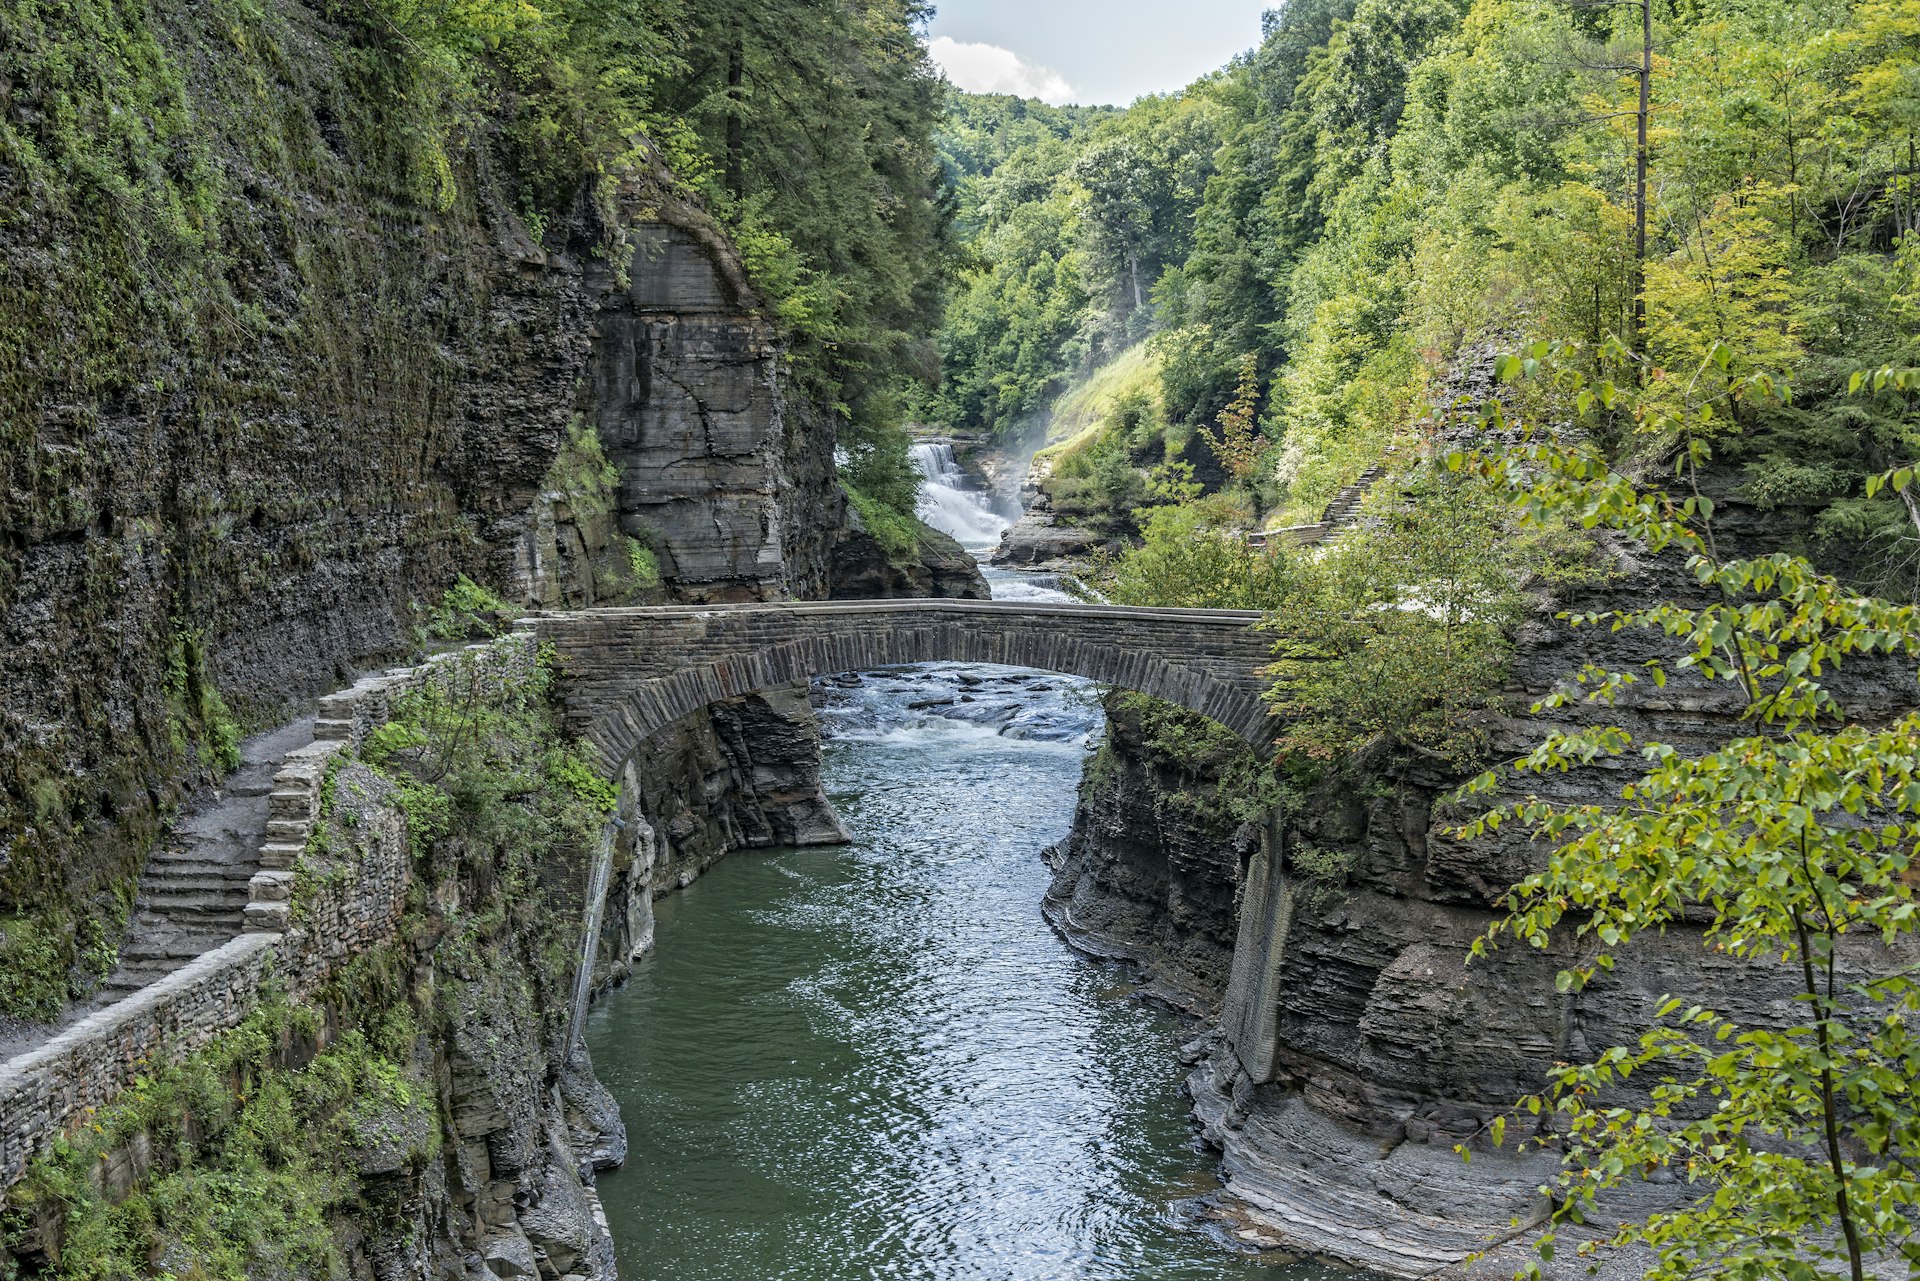 The Lower Falls at Letchworth State Park, New York